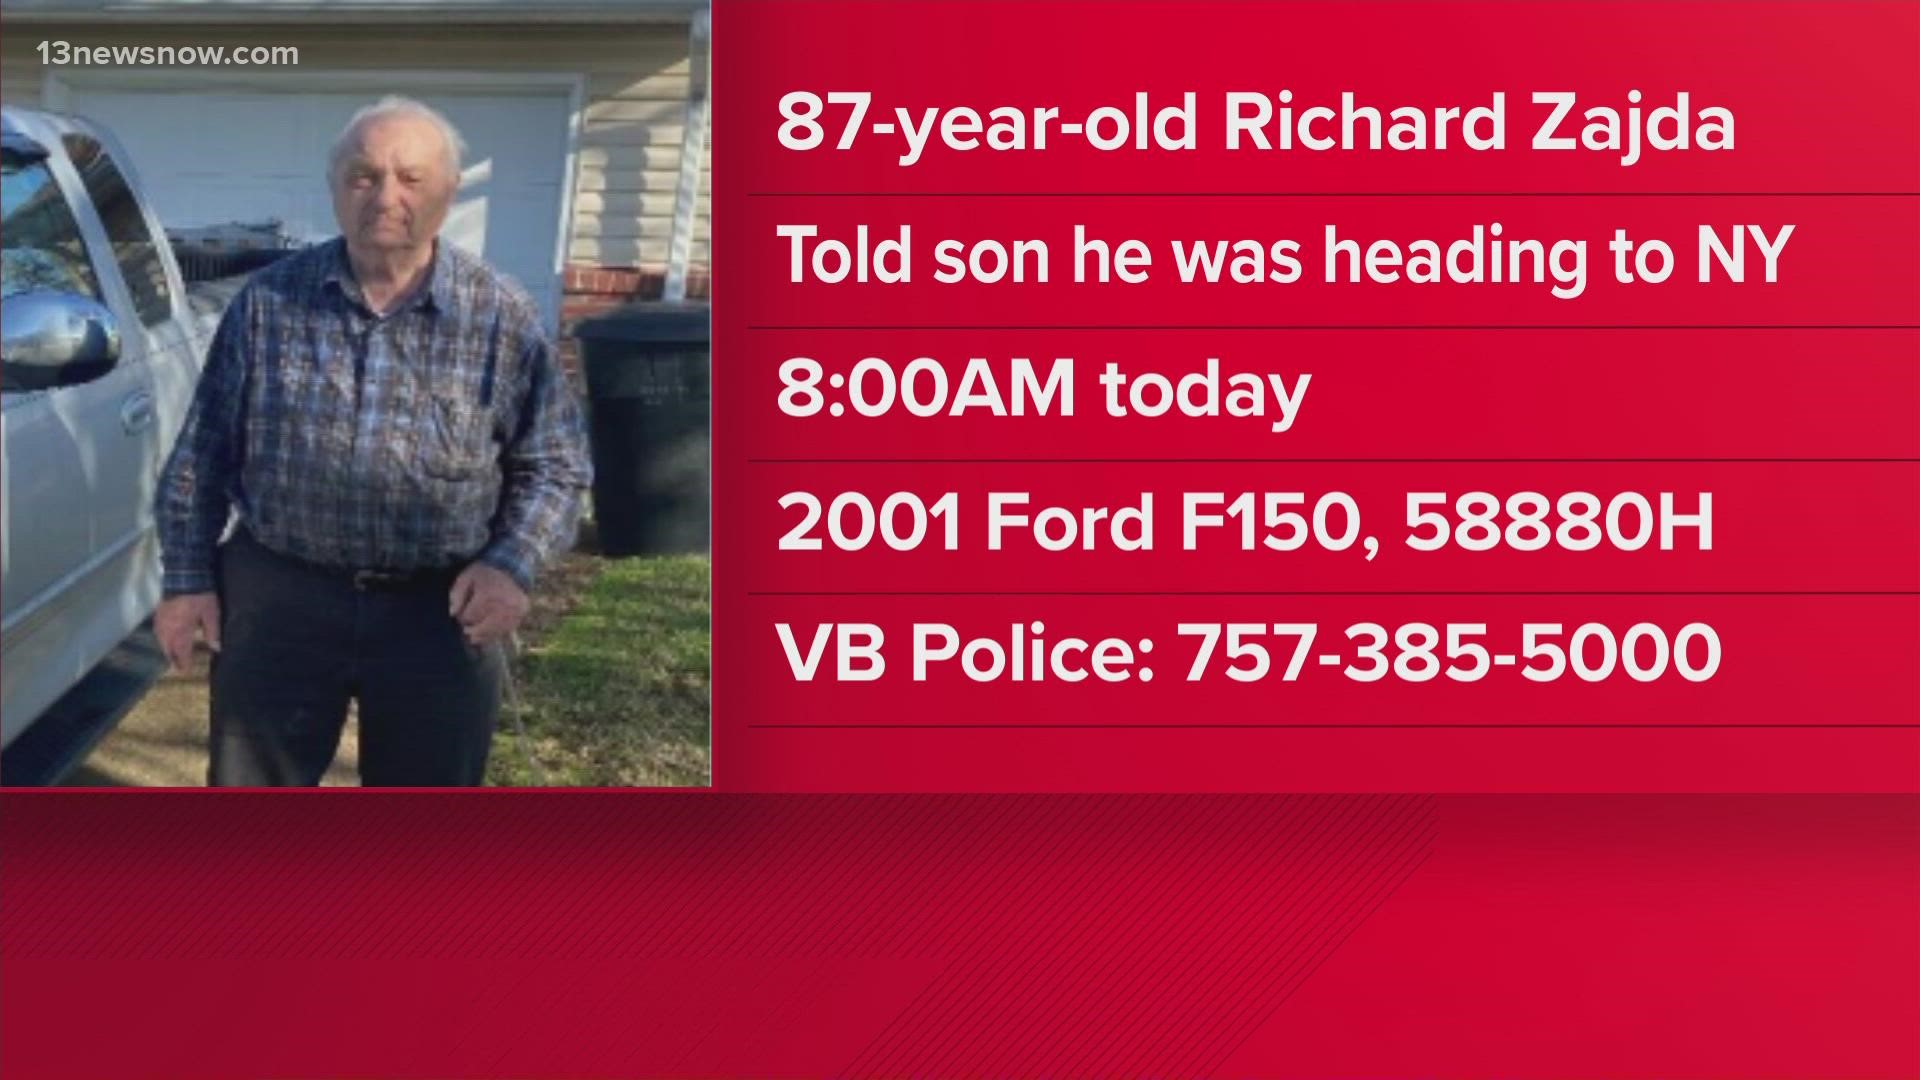 Richard Zajda is described as being five feet and nine inches tall, weighing 220 pounds, and having gray hair and brown eyes.